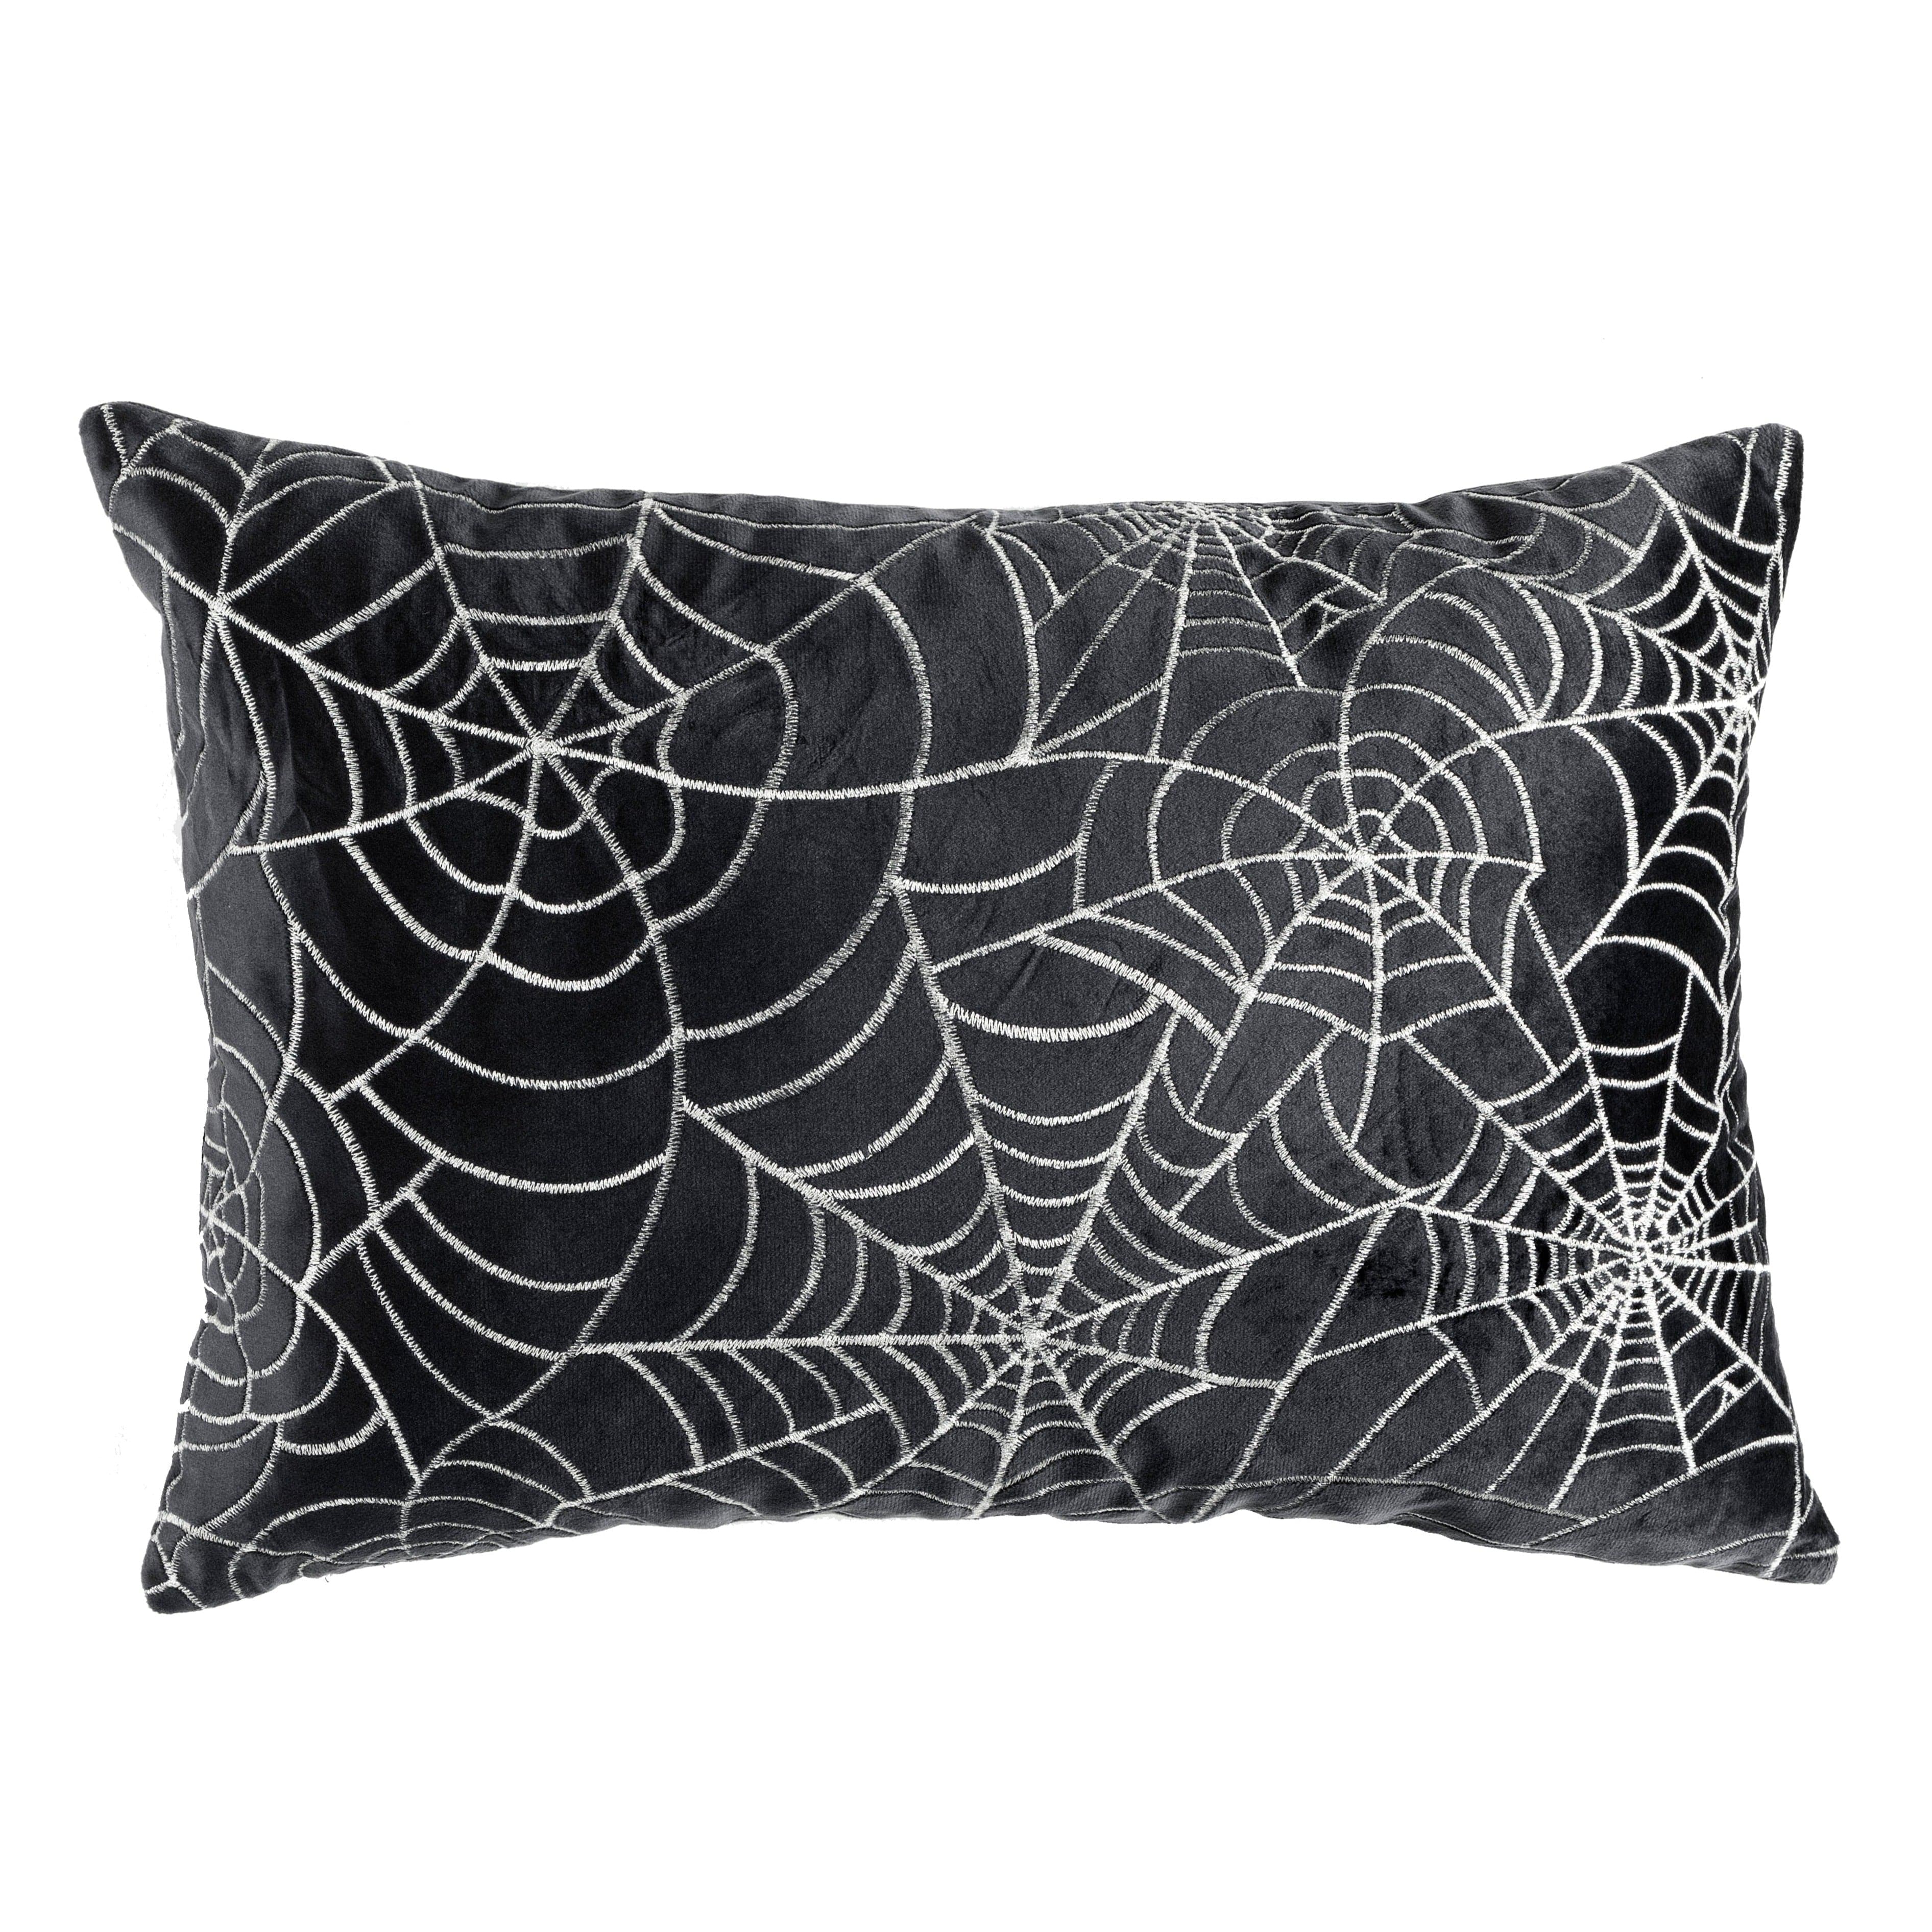 Housewarming Gift Idea: A Giant Spider Pillow From This Online Shop